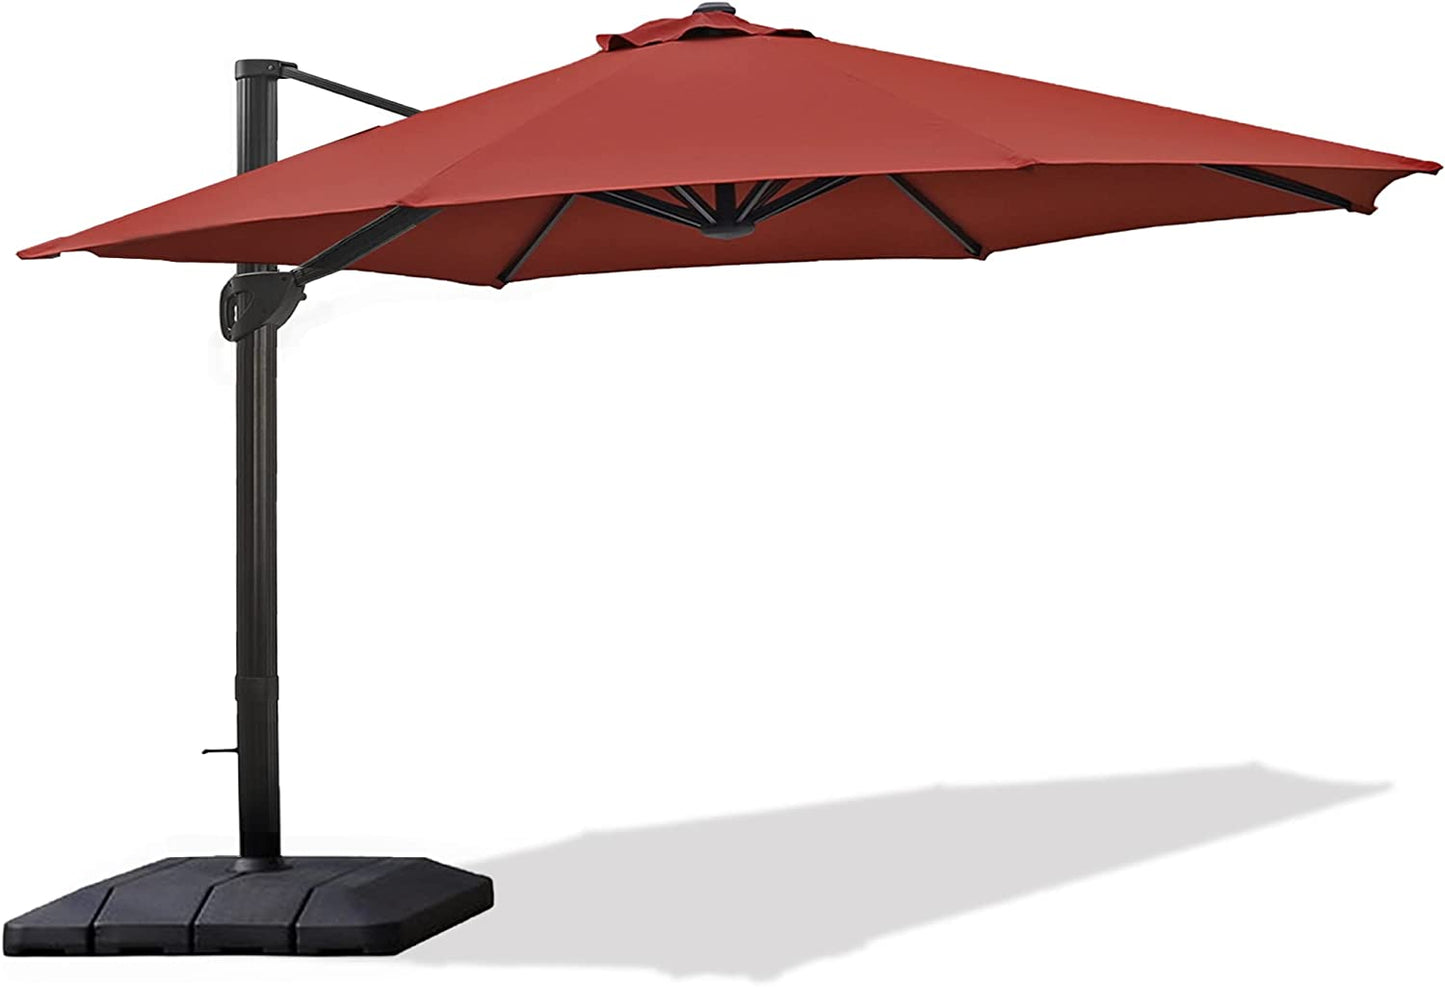 Offset patio umbrella with base included 11ft Offset Cantilever Umbrella